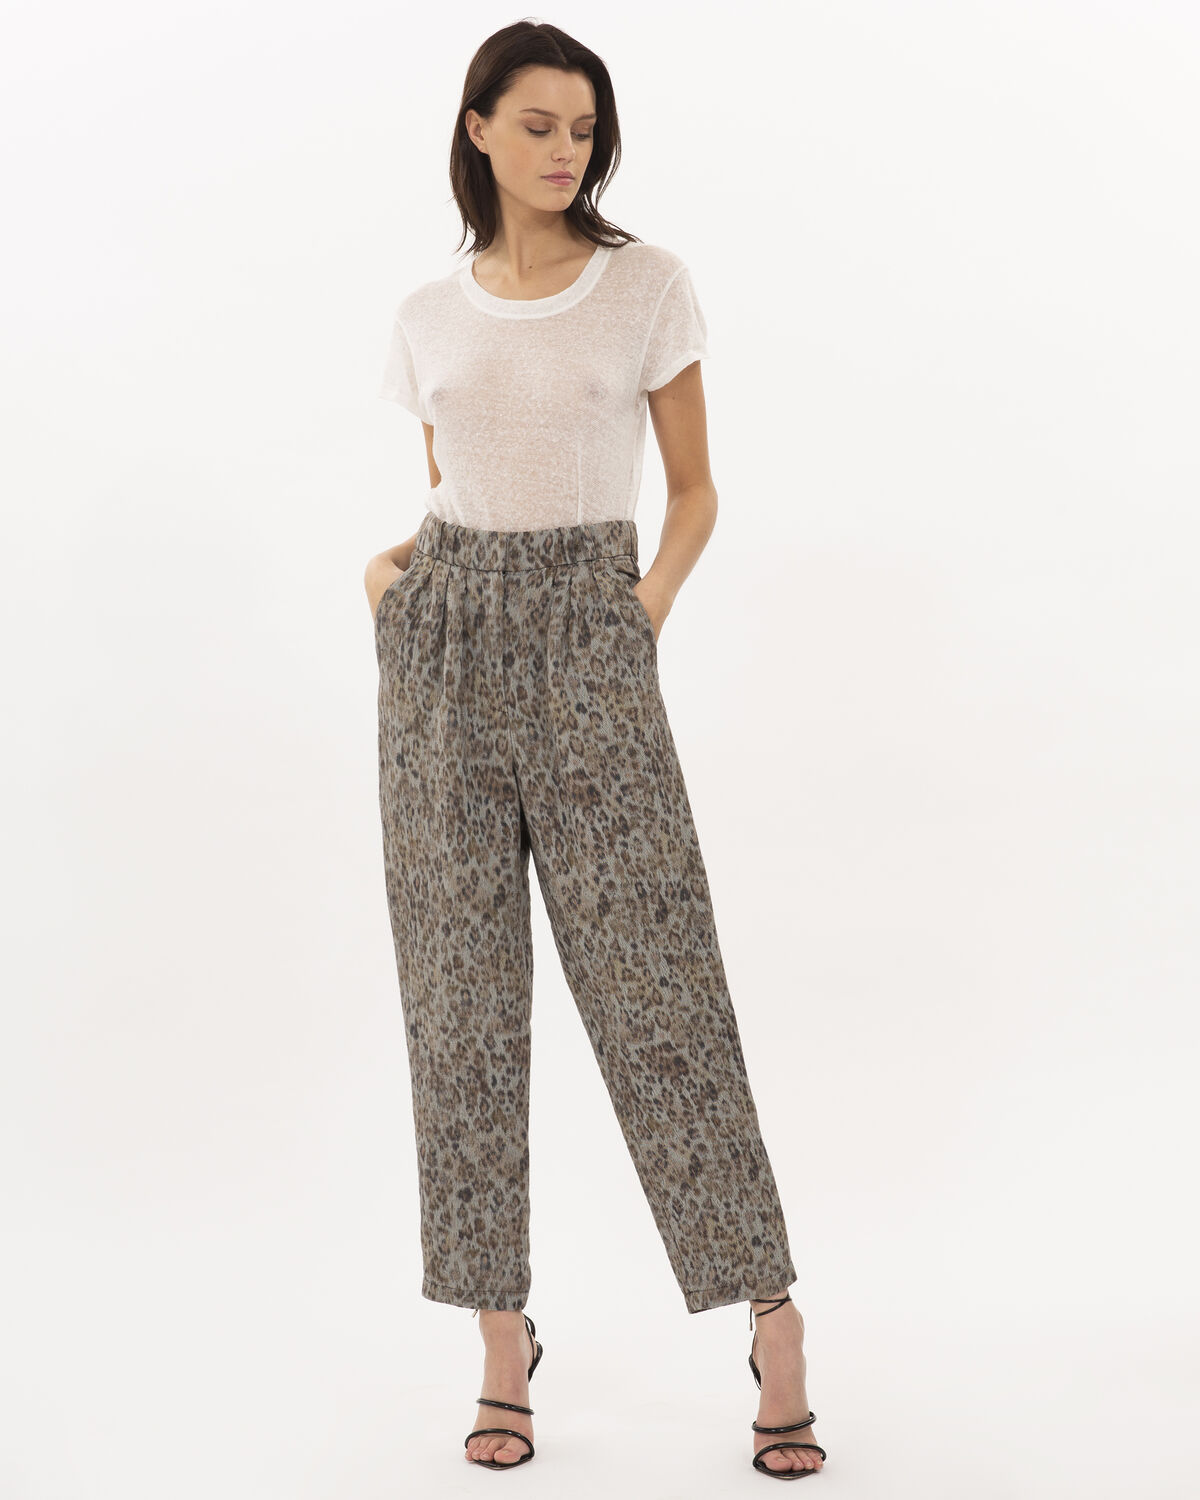 Photo of IRO Paris Pride Pants Grey - These Pants Are Sublimated By Their Leopard Pattern And Wide Cut. Wear It High Waist Thanks To Its Elastic Waist. Combine It With A Pair Of Sandals And A Linen Top For A Modern And Rock Look. Trousers